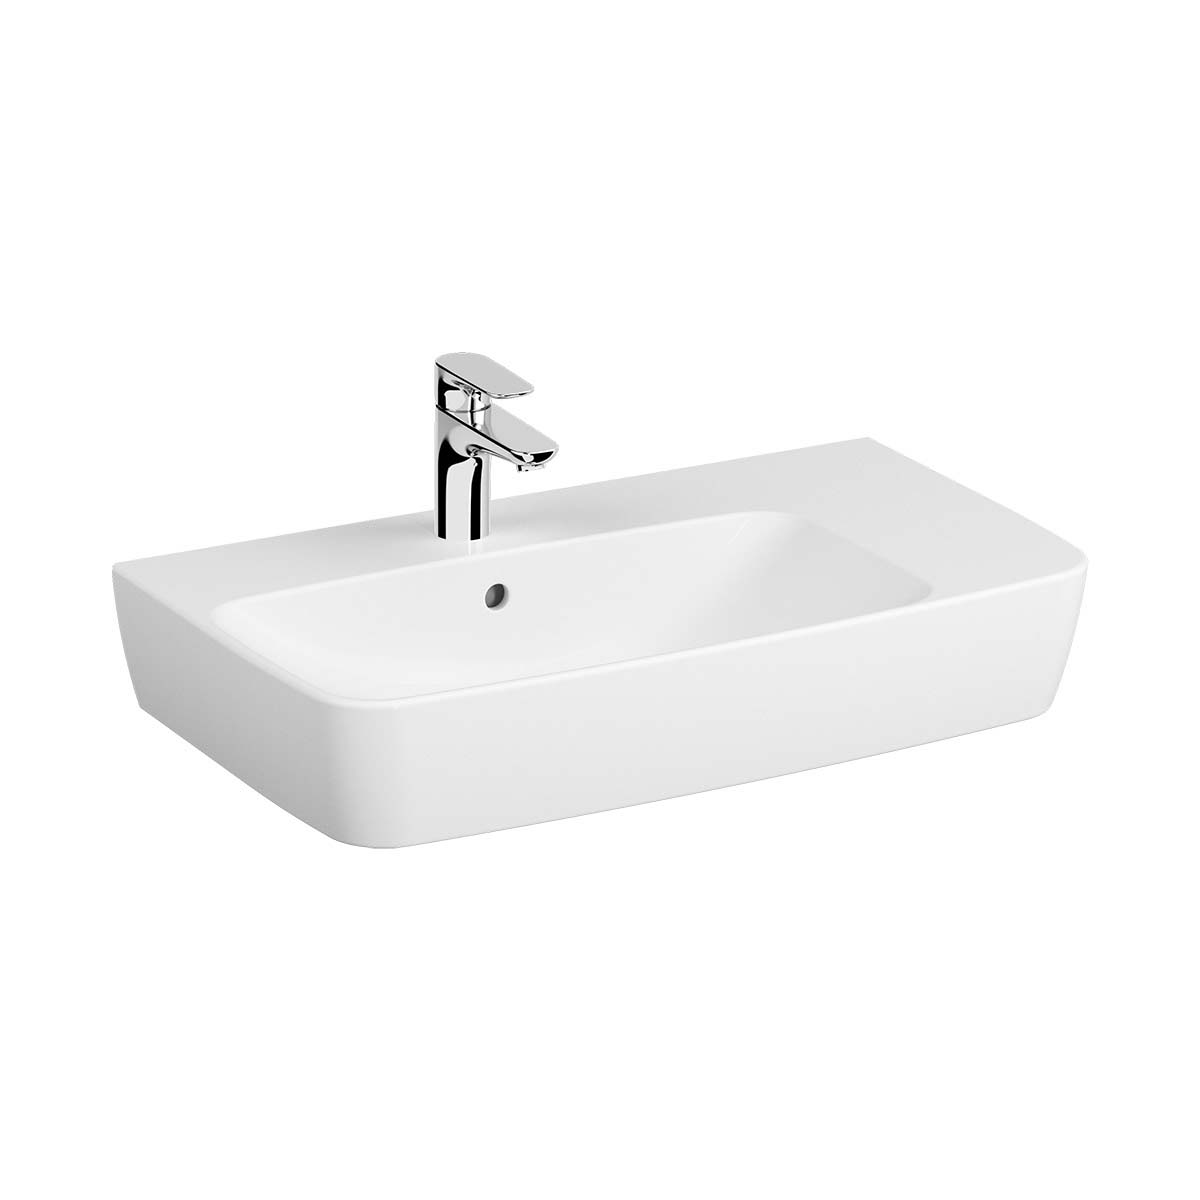 Assymetrical Basin, 75X45 cm, One Tap Hole, With Overflow Hole, For Countertop Use